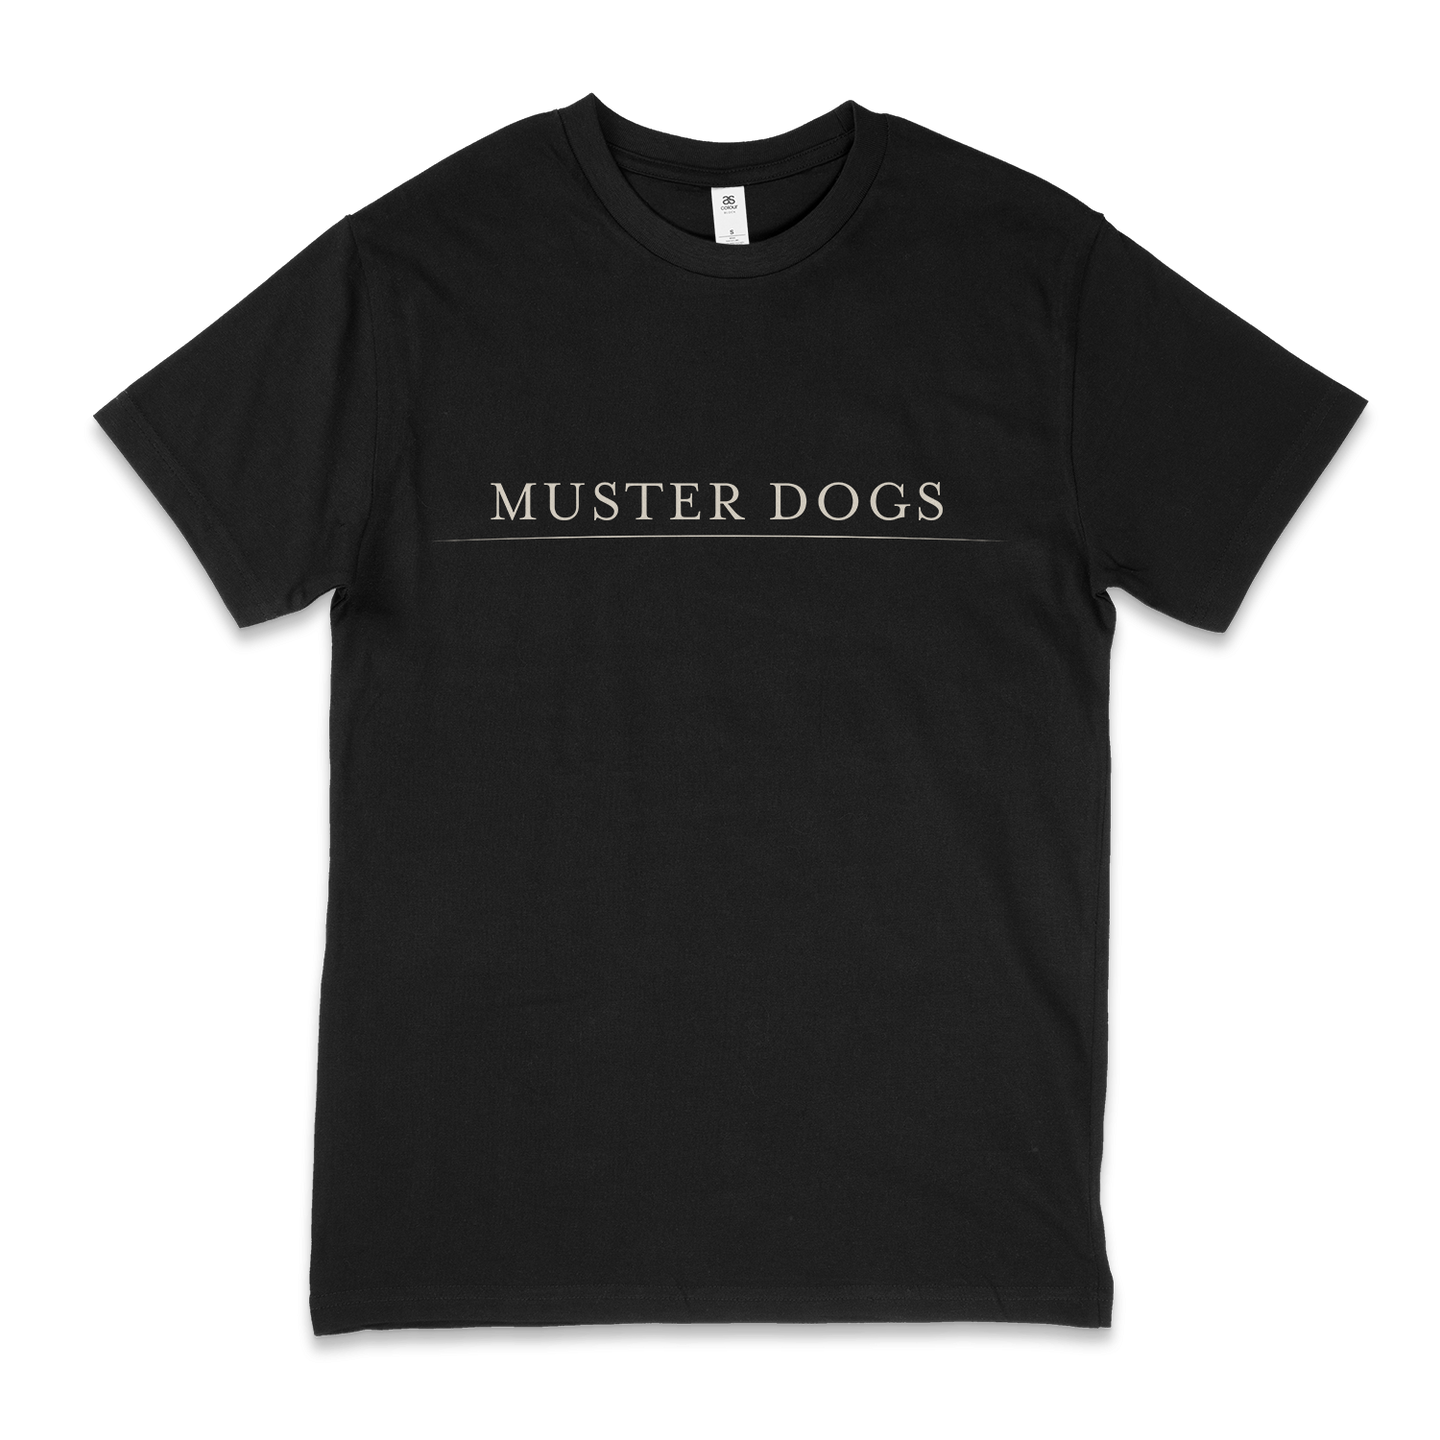 Muster Dogs Black Tee